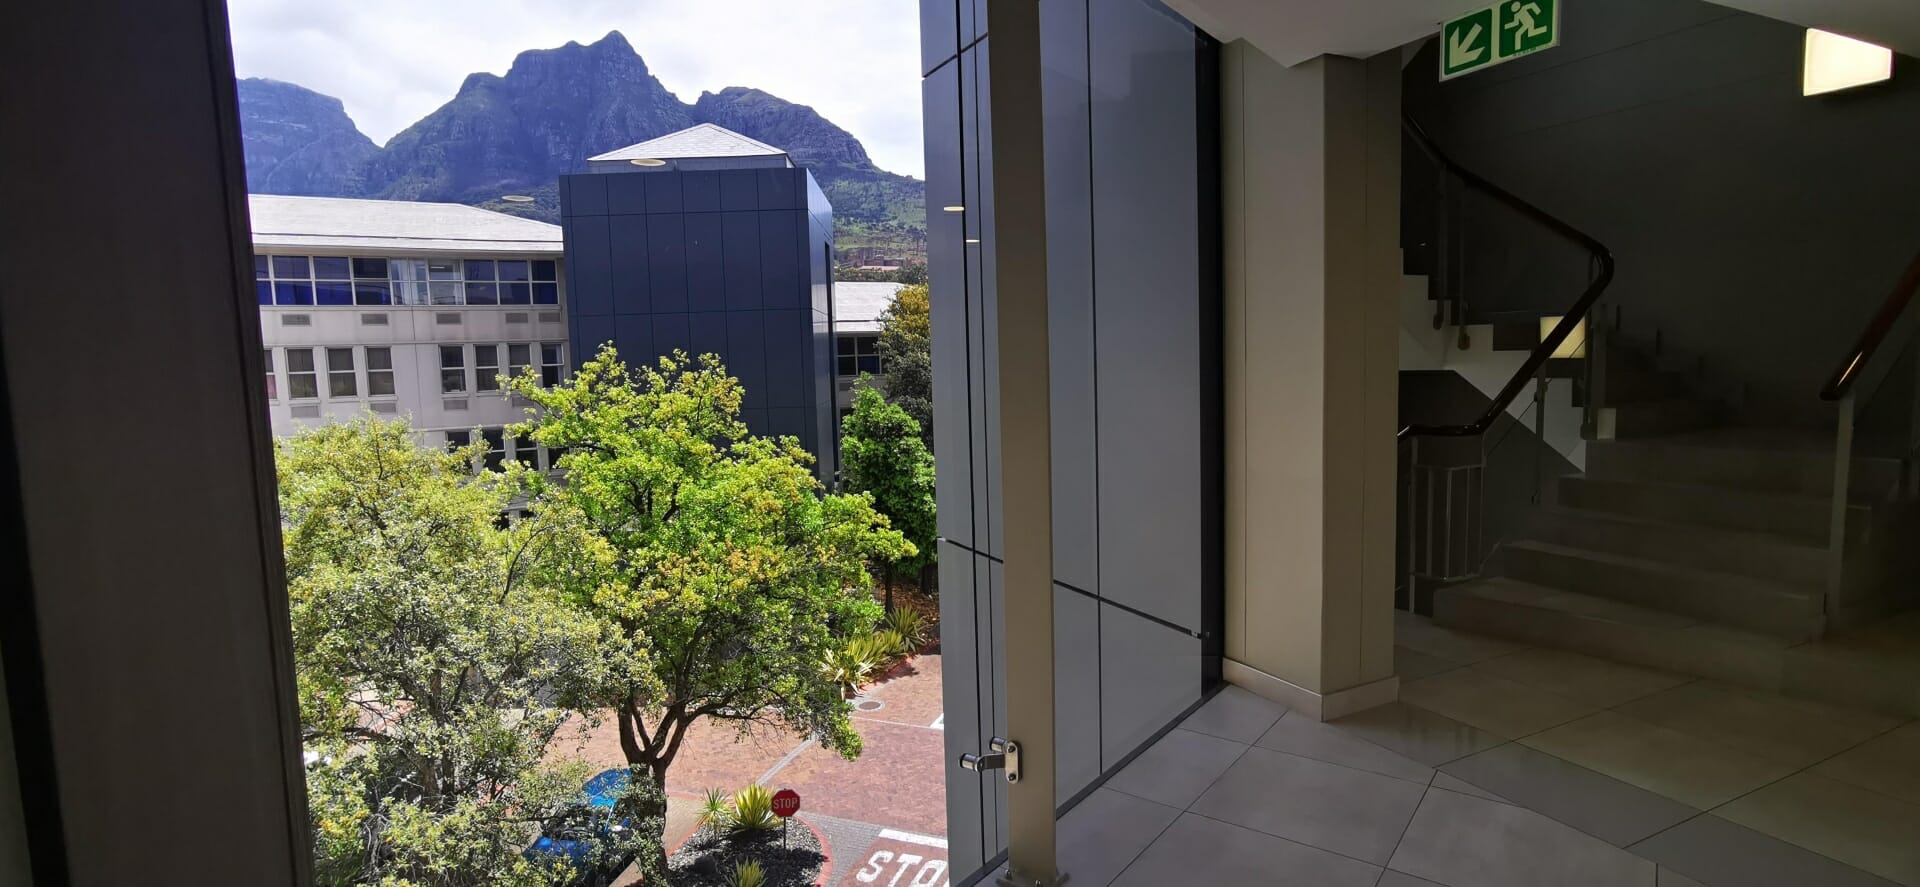 2,100m² – Belmont Entire Building with Naming rights in Rondebosch!